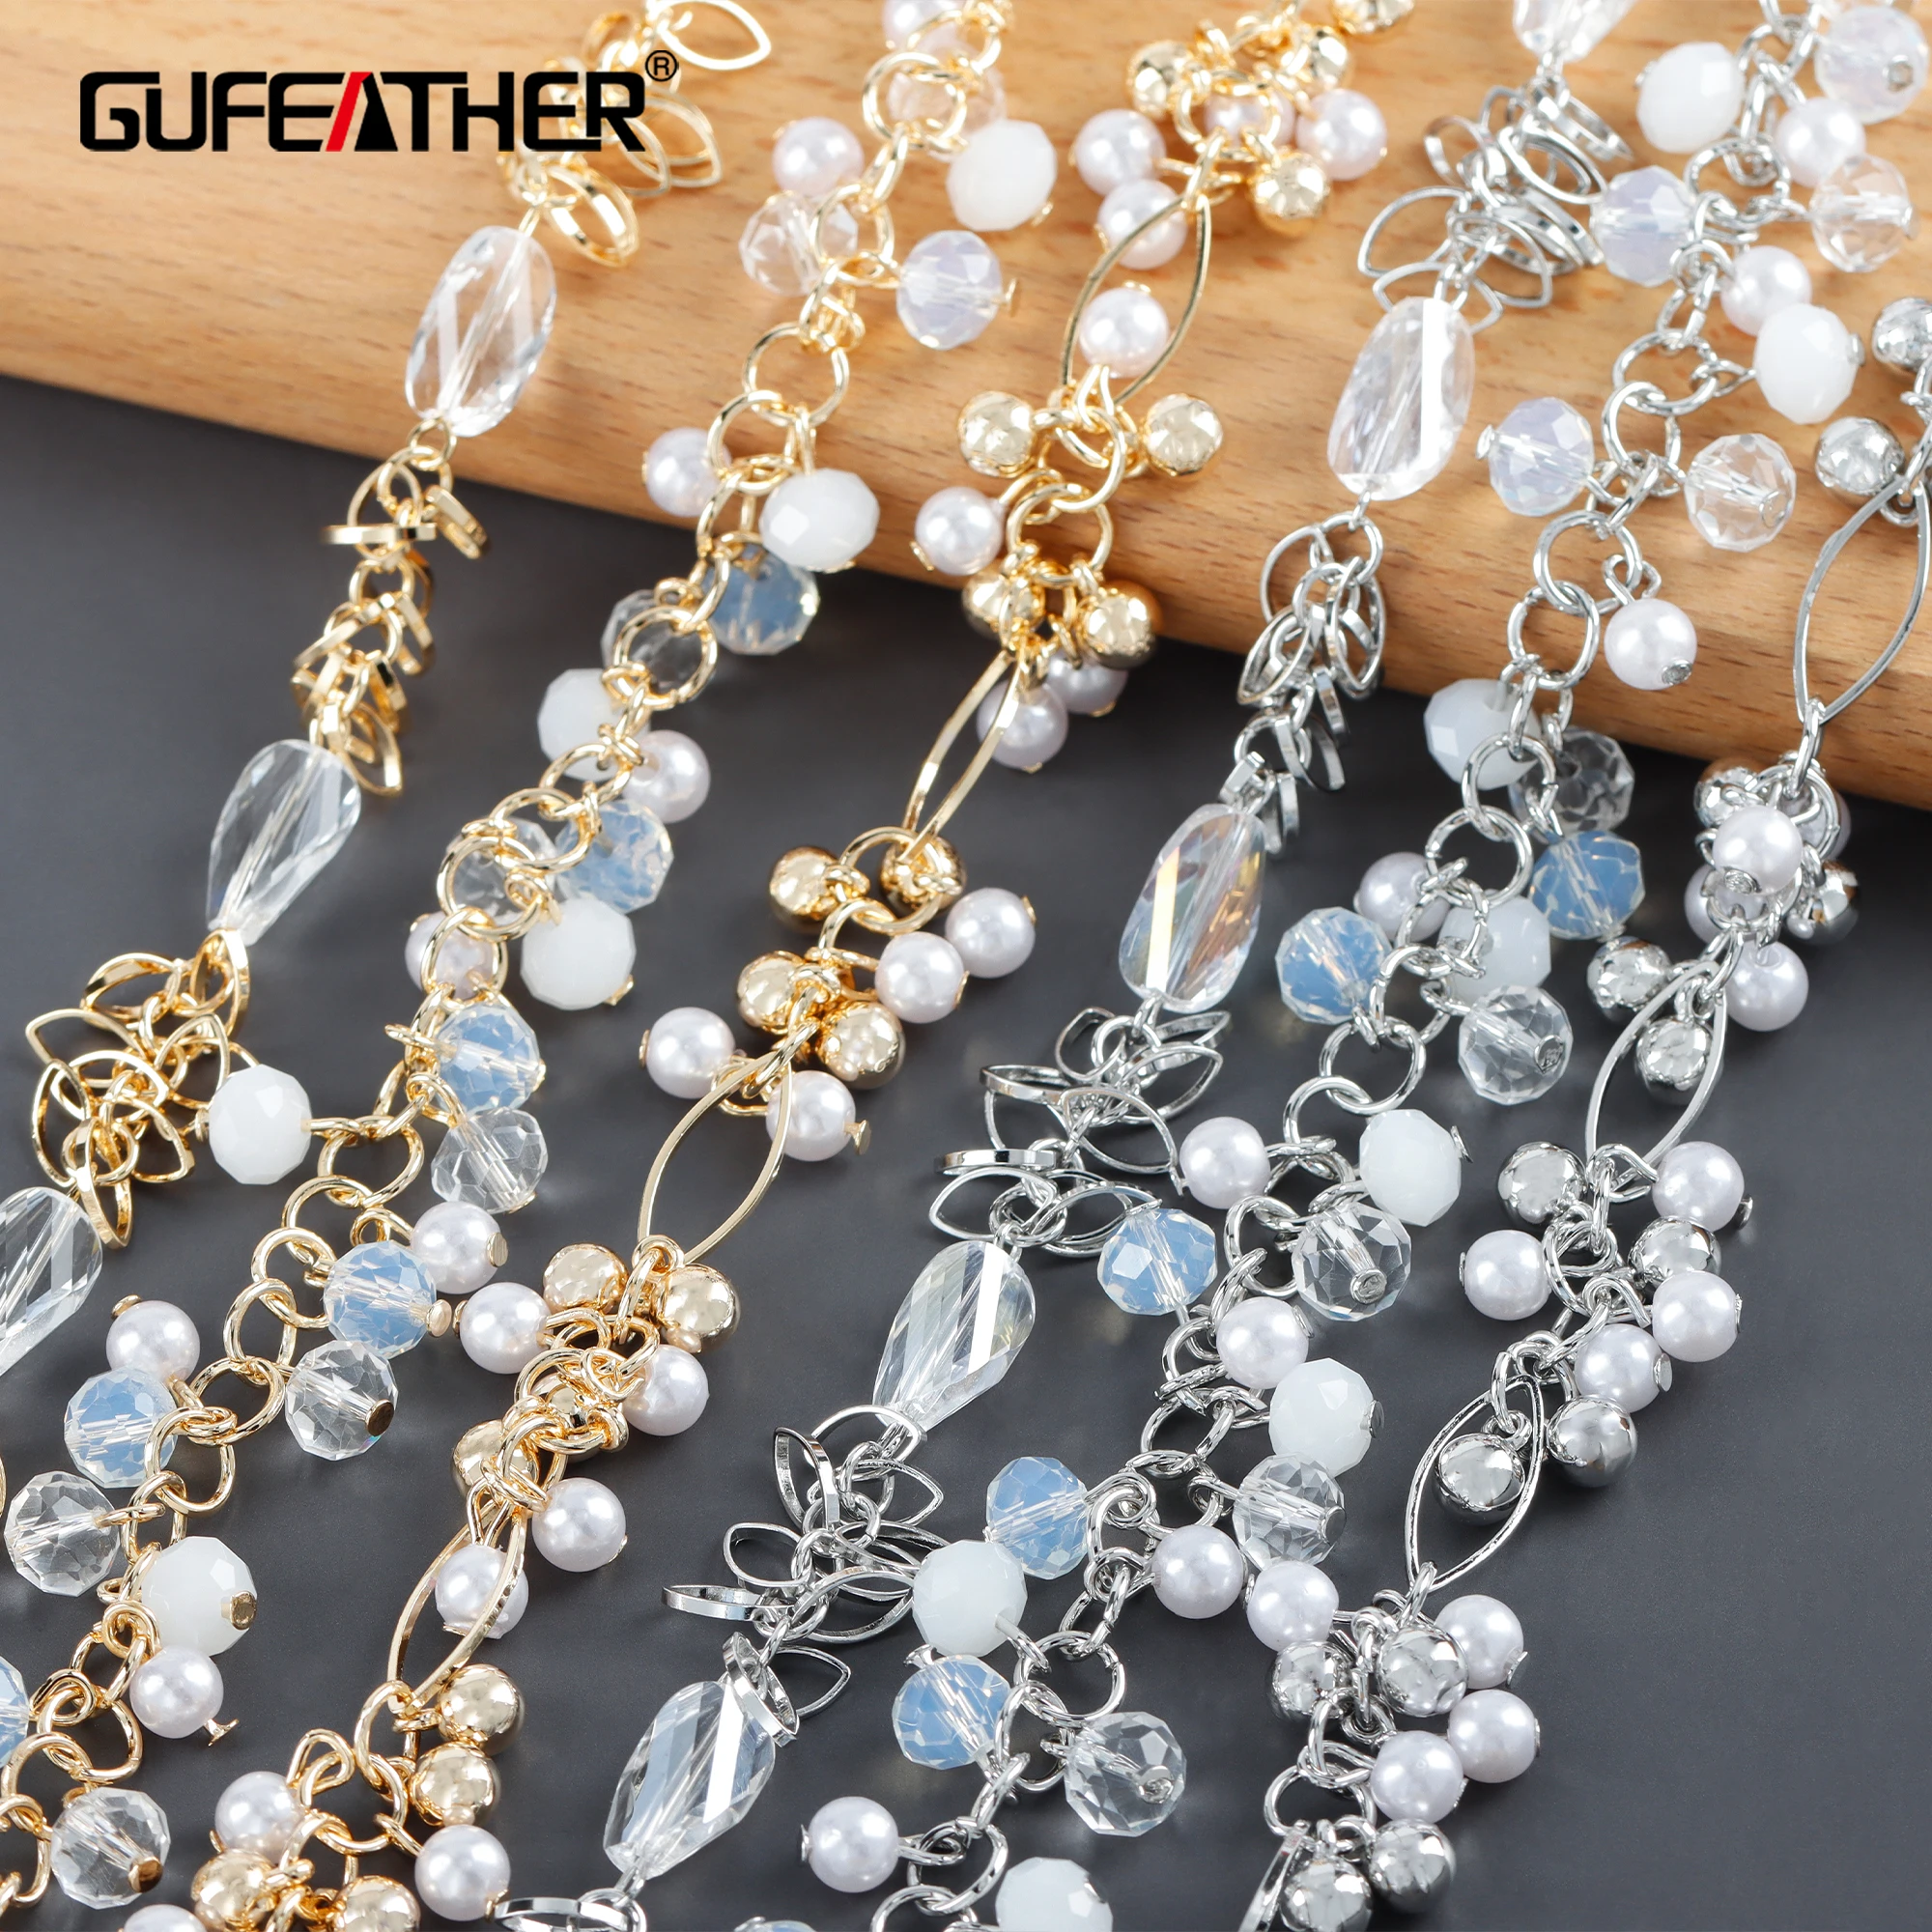 GUFEATHER C229,chain,pass REACH,nickel free,18k gold rhodium plated,copper,plastic pearl,diy necklace,jewelry making,50cm/lot